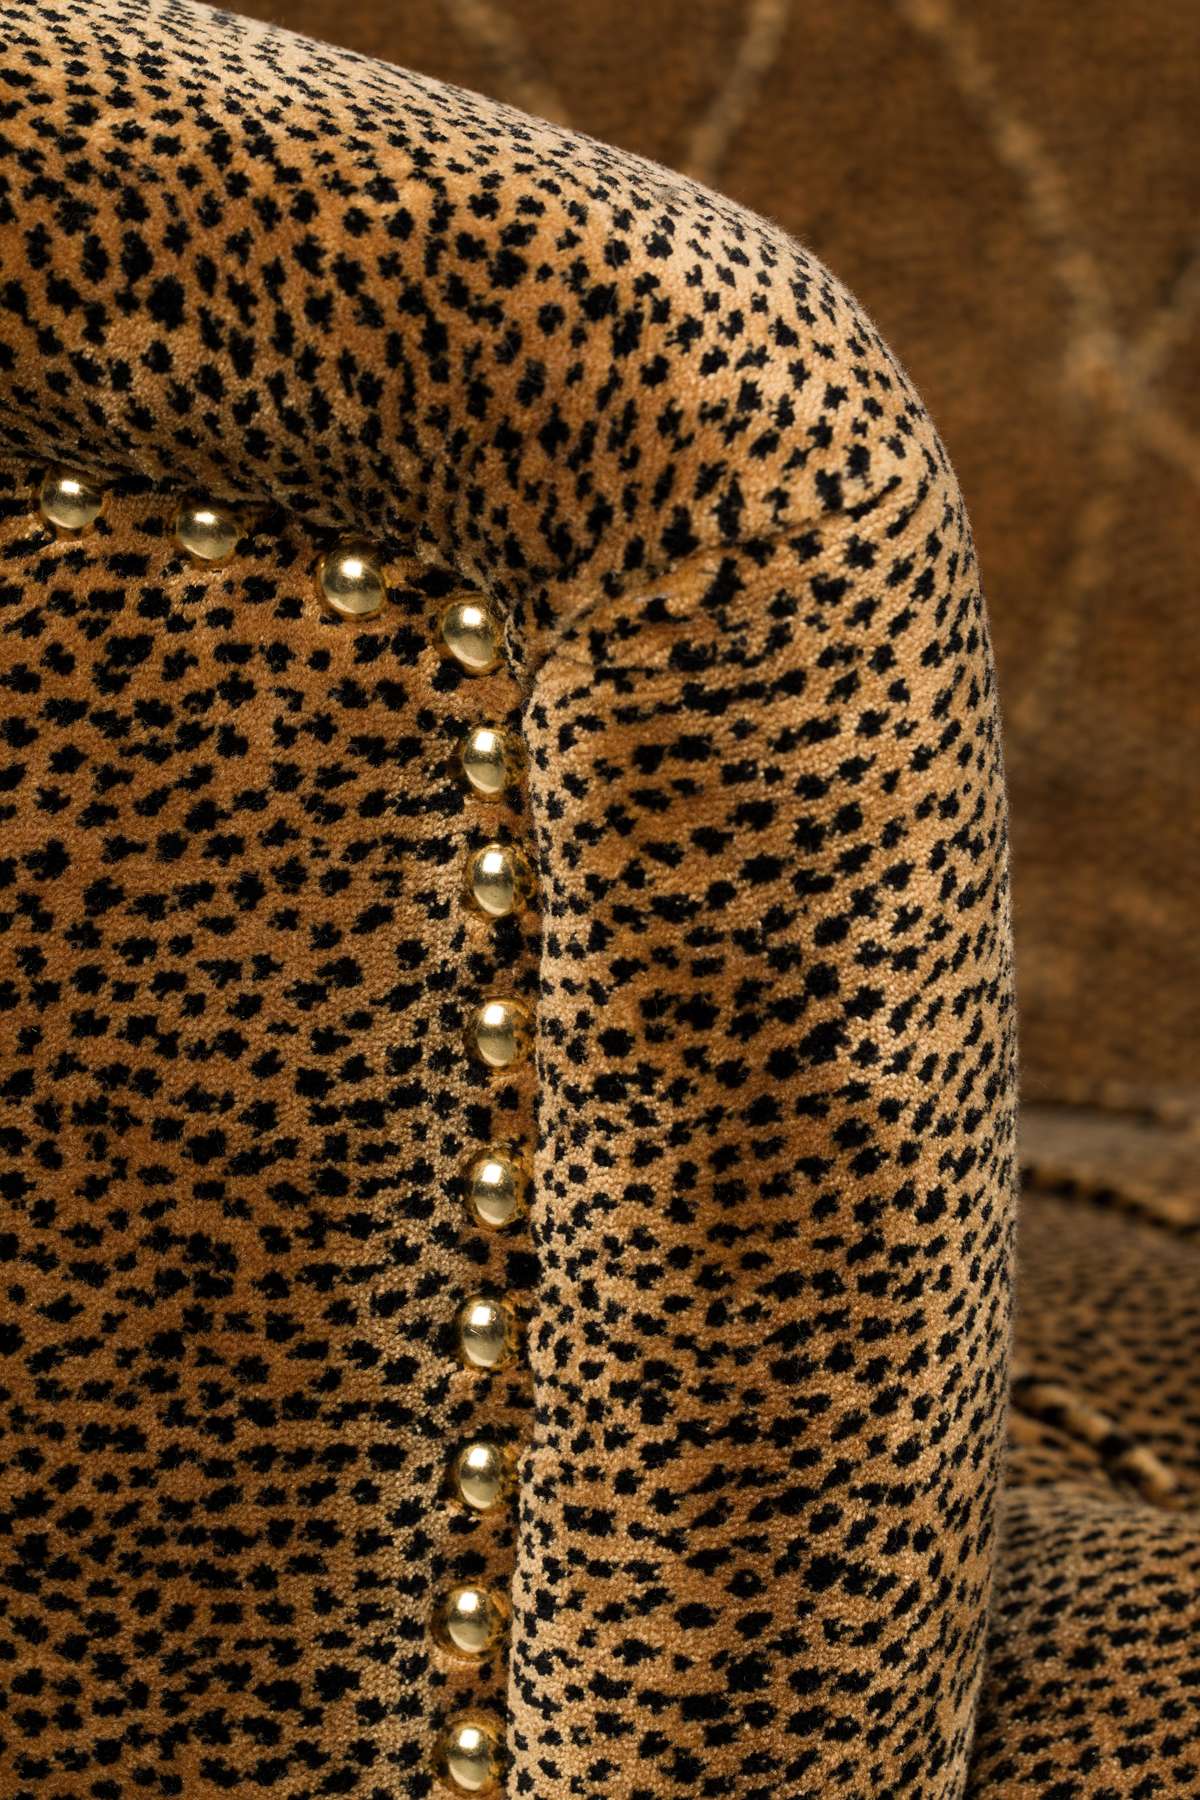 Our sofa bold monkey too pretty to sit on panther is nonsense. This velvet sofa in the color of flashy leopard spots also has a borders with studs. In other words? Sofa bold monkey too pretty to sit on the leopard looks fancy, but it is equally perfect for watching Netflix at night.